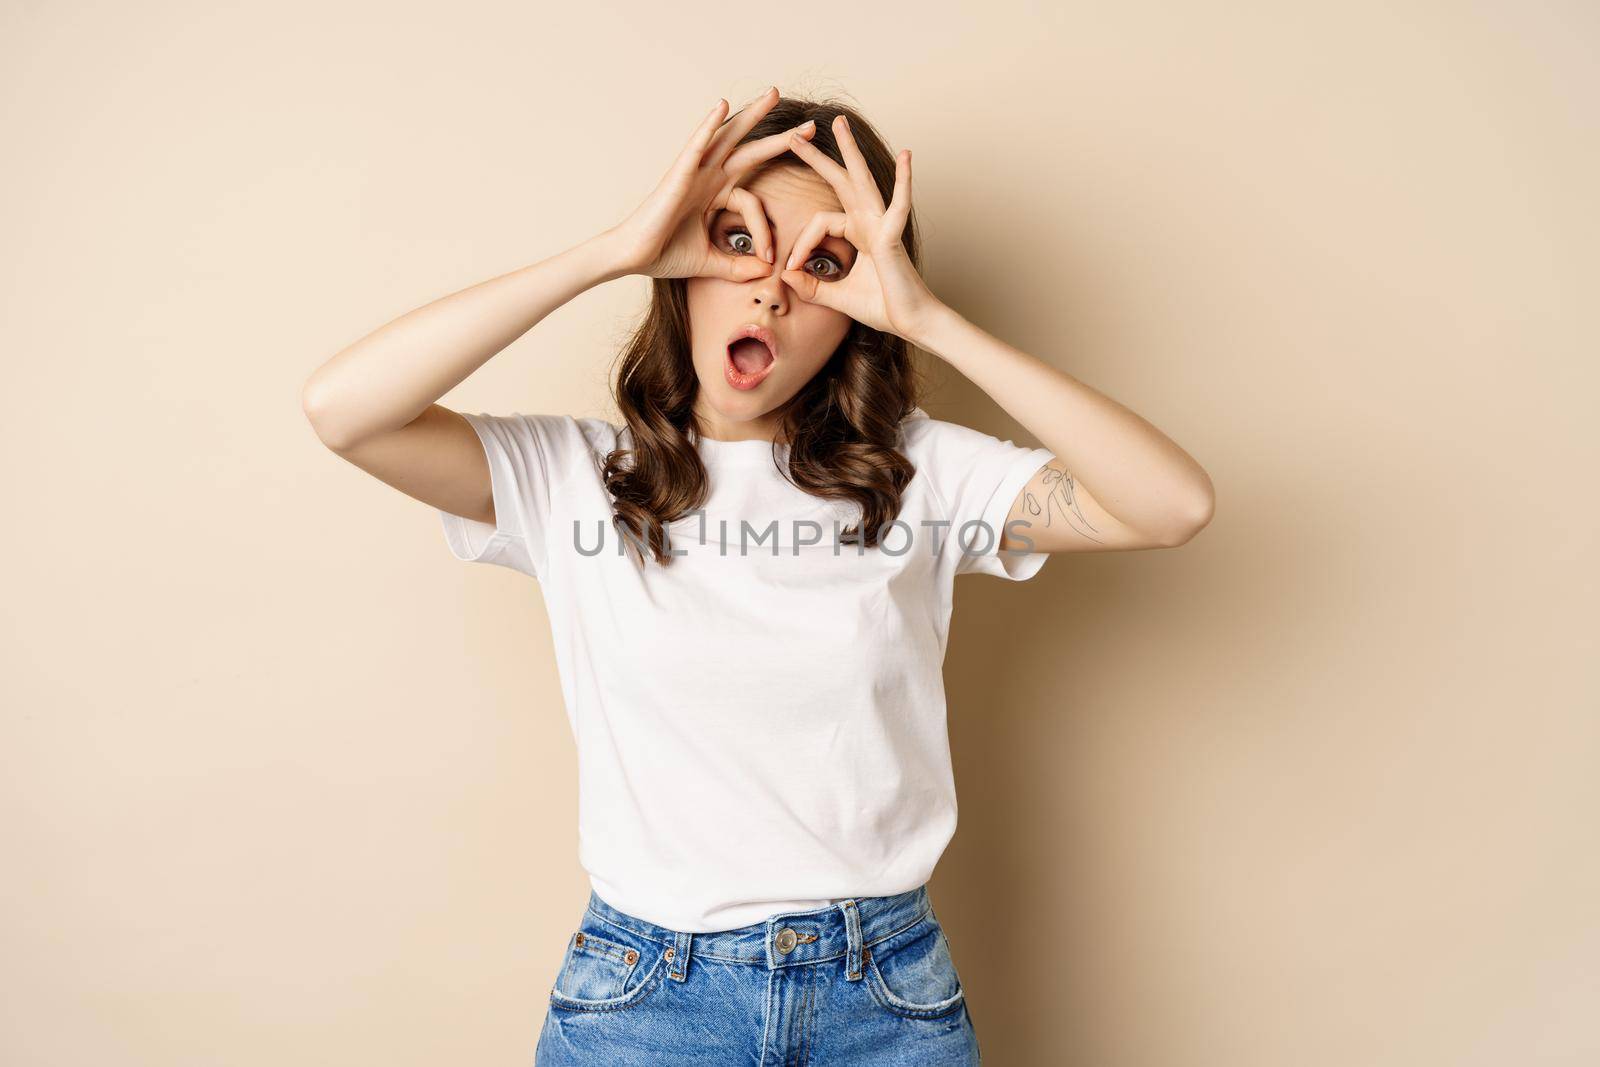 Funny brunette woman having fun, showing finger glasses gesture and fool around, posing over beige background.